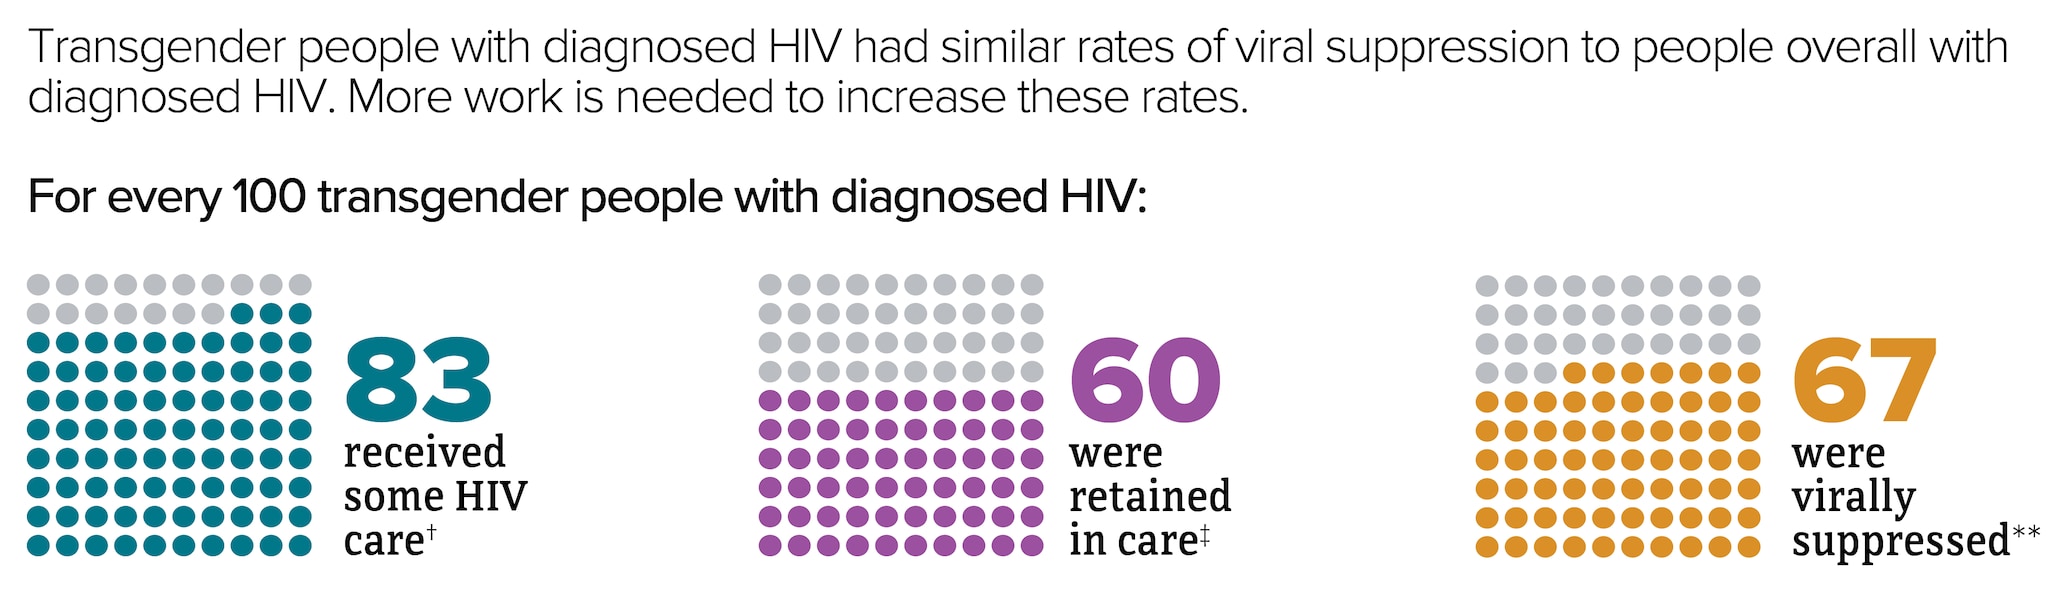 people with diagnosed HIV in the US who received some HIV care, were retained in care, and were virally suppressed.